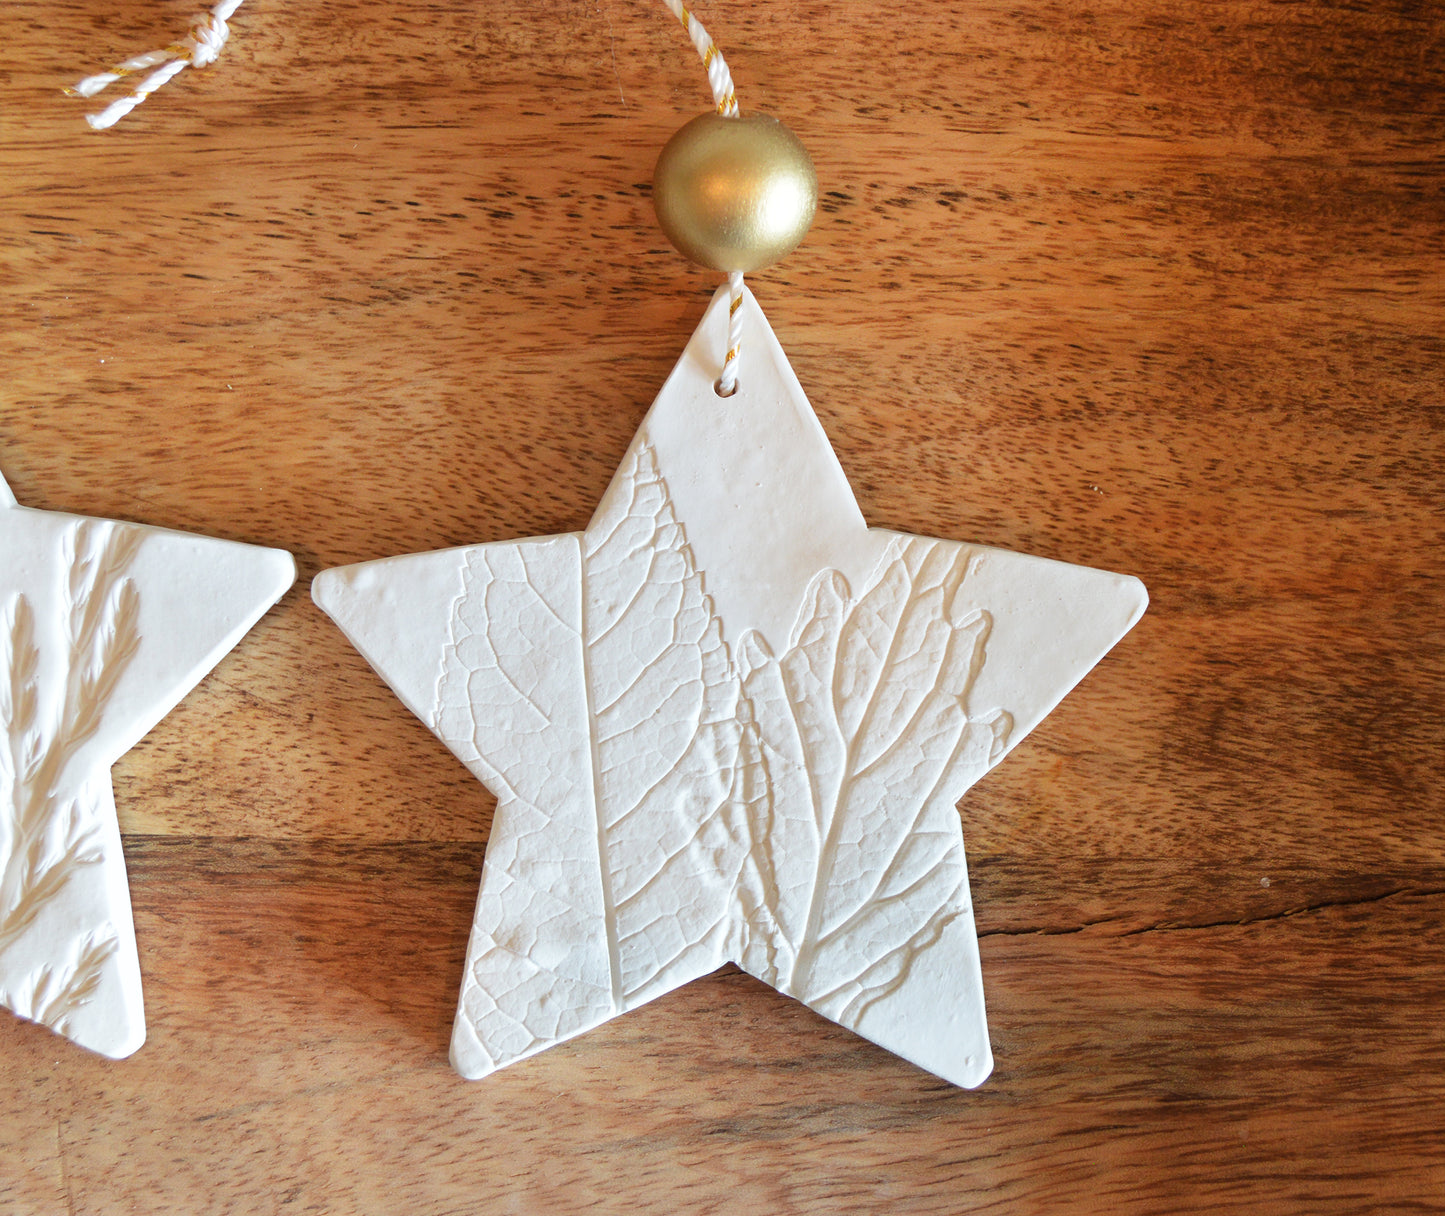 3 pure white star shaped ornaments